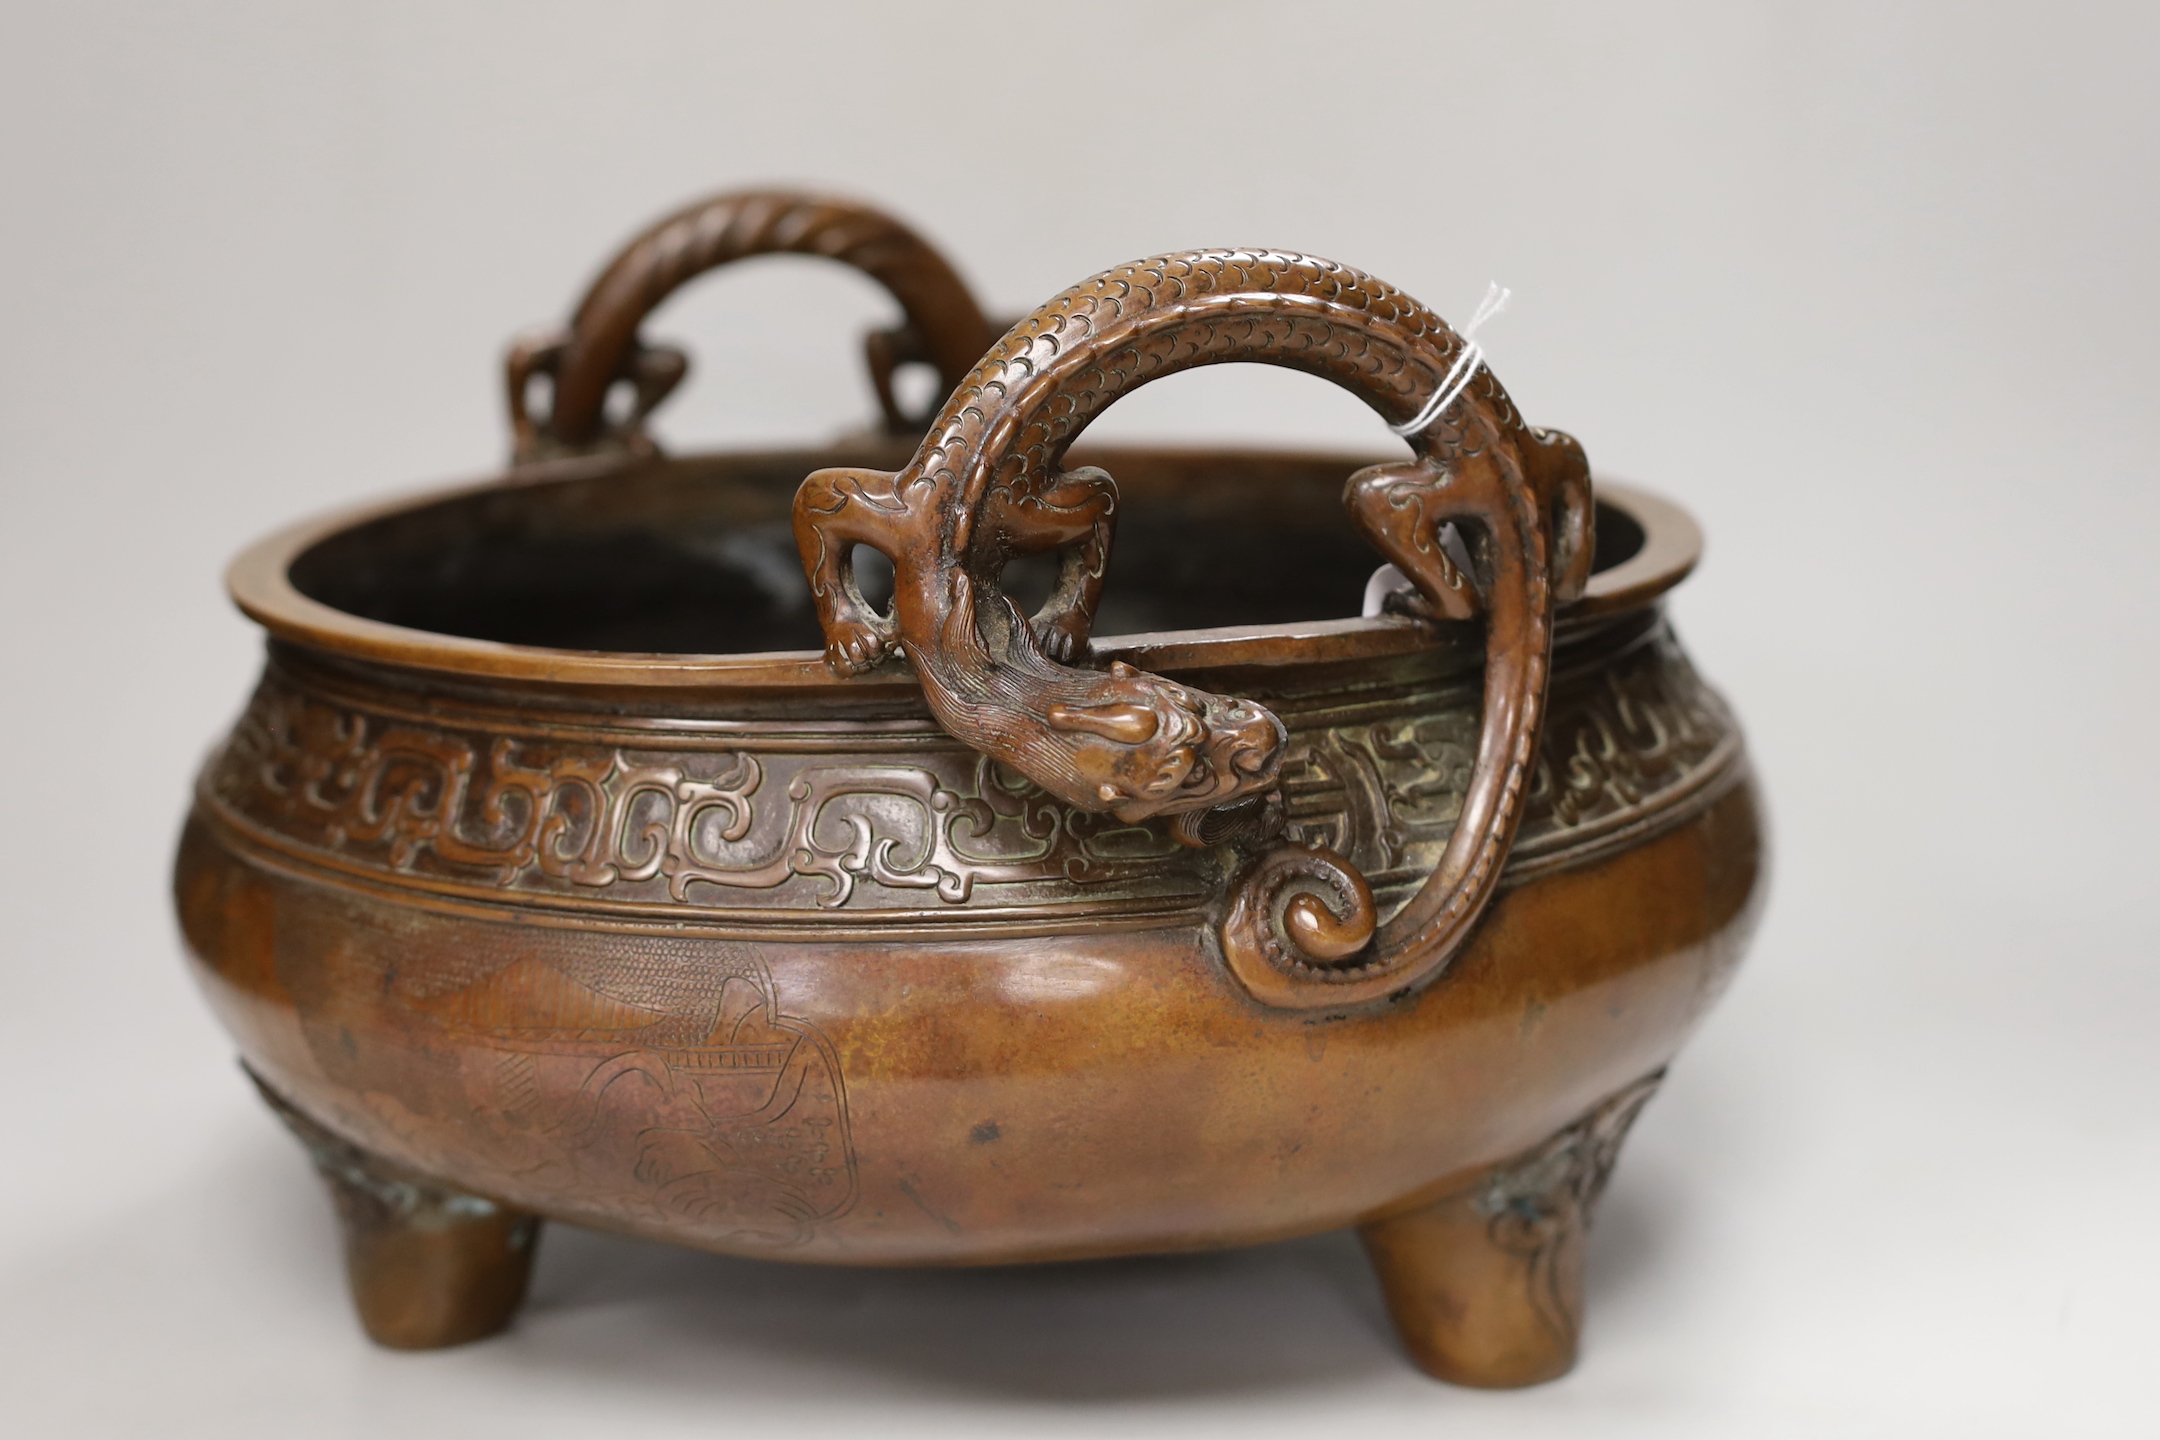 A massive Chinese brown patinated bronze ding censer, with dragon handles, 23.5cm including handles high